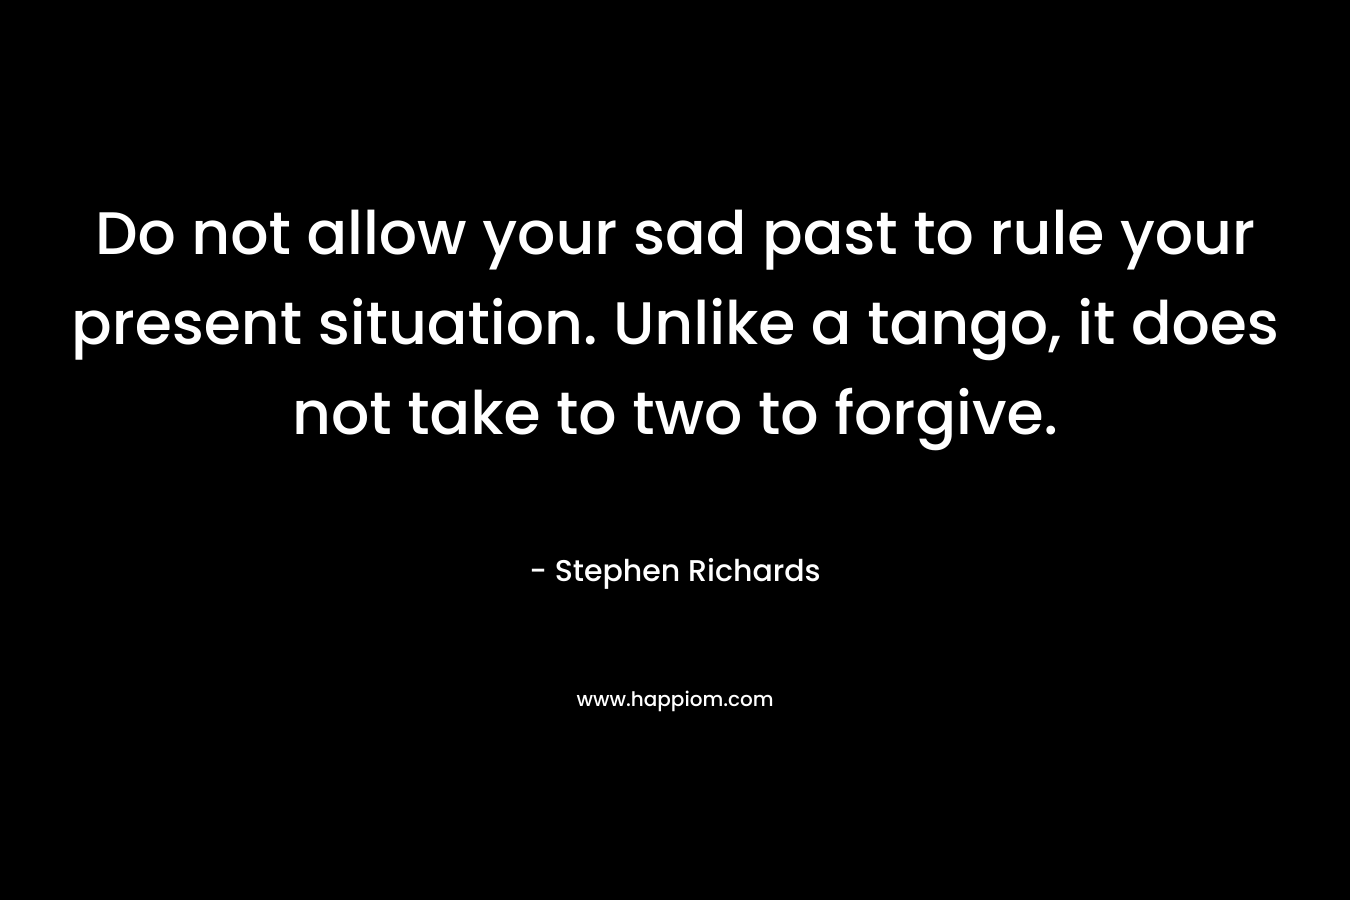 Do not allow your sad past to rule your present situation. Unlike a tango, it does not take to two to forgive.